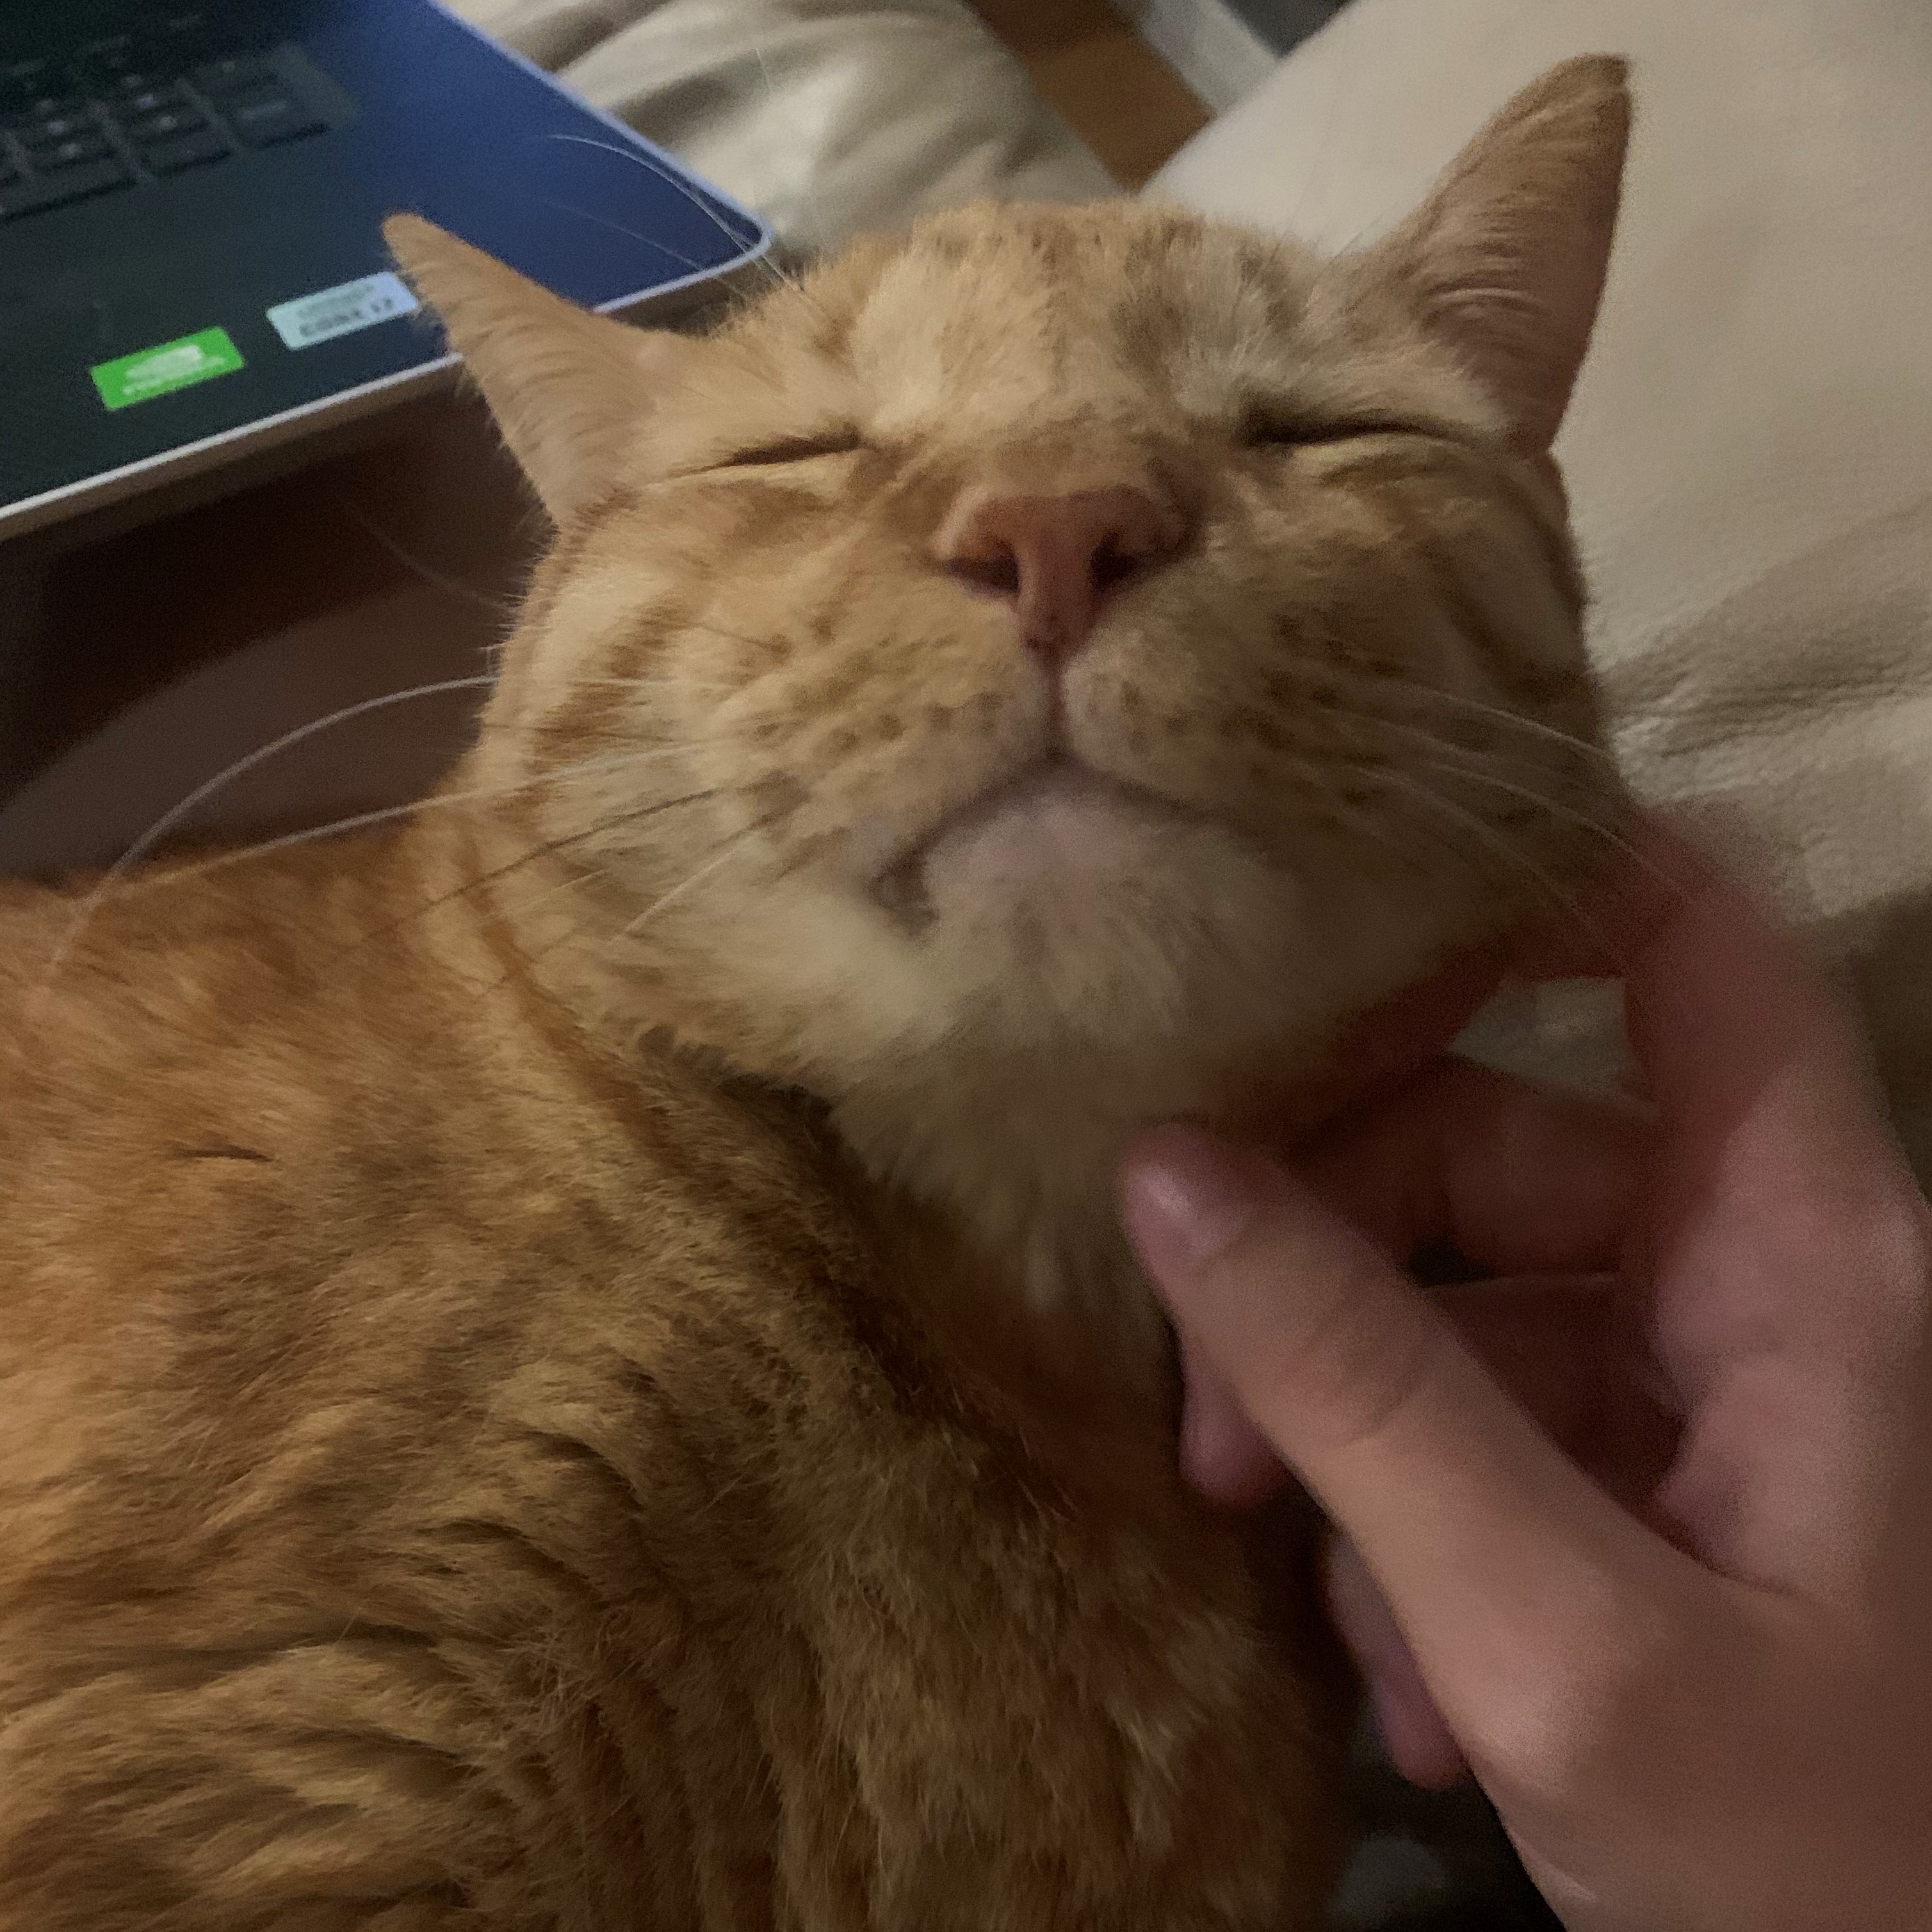 a close-up picture of stanley getting his chin scratched. he lifts his head away from the hand and closes his eyes. you can see his pointy tooth under his lip and his ears are twisted a bit from joy